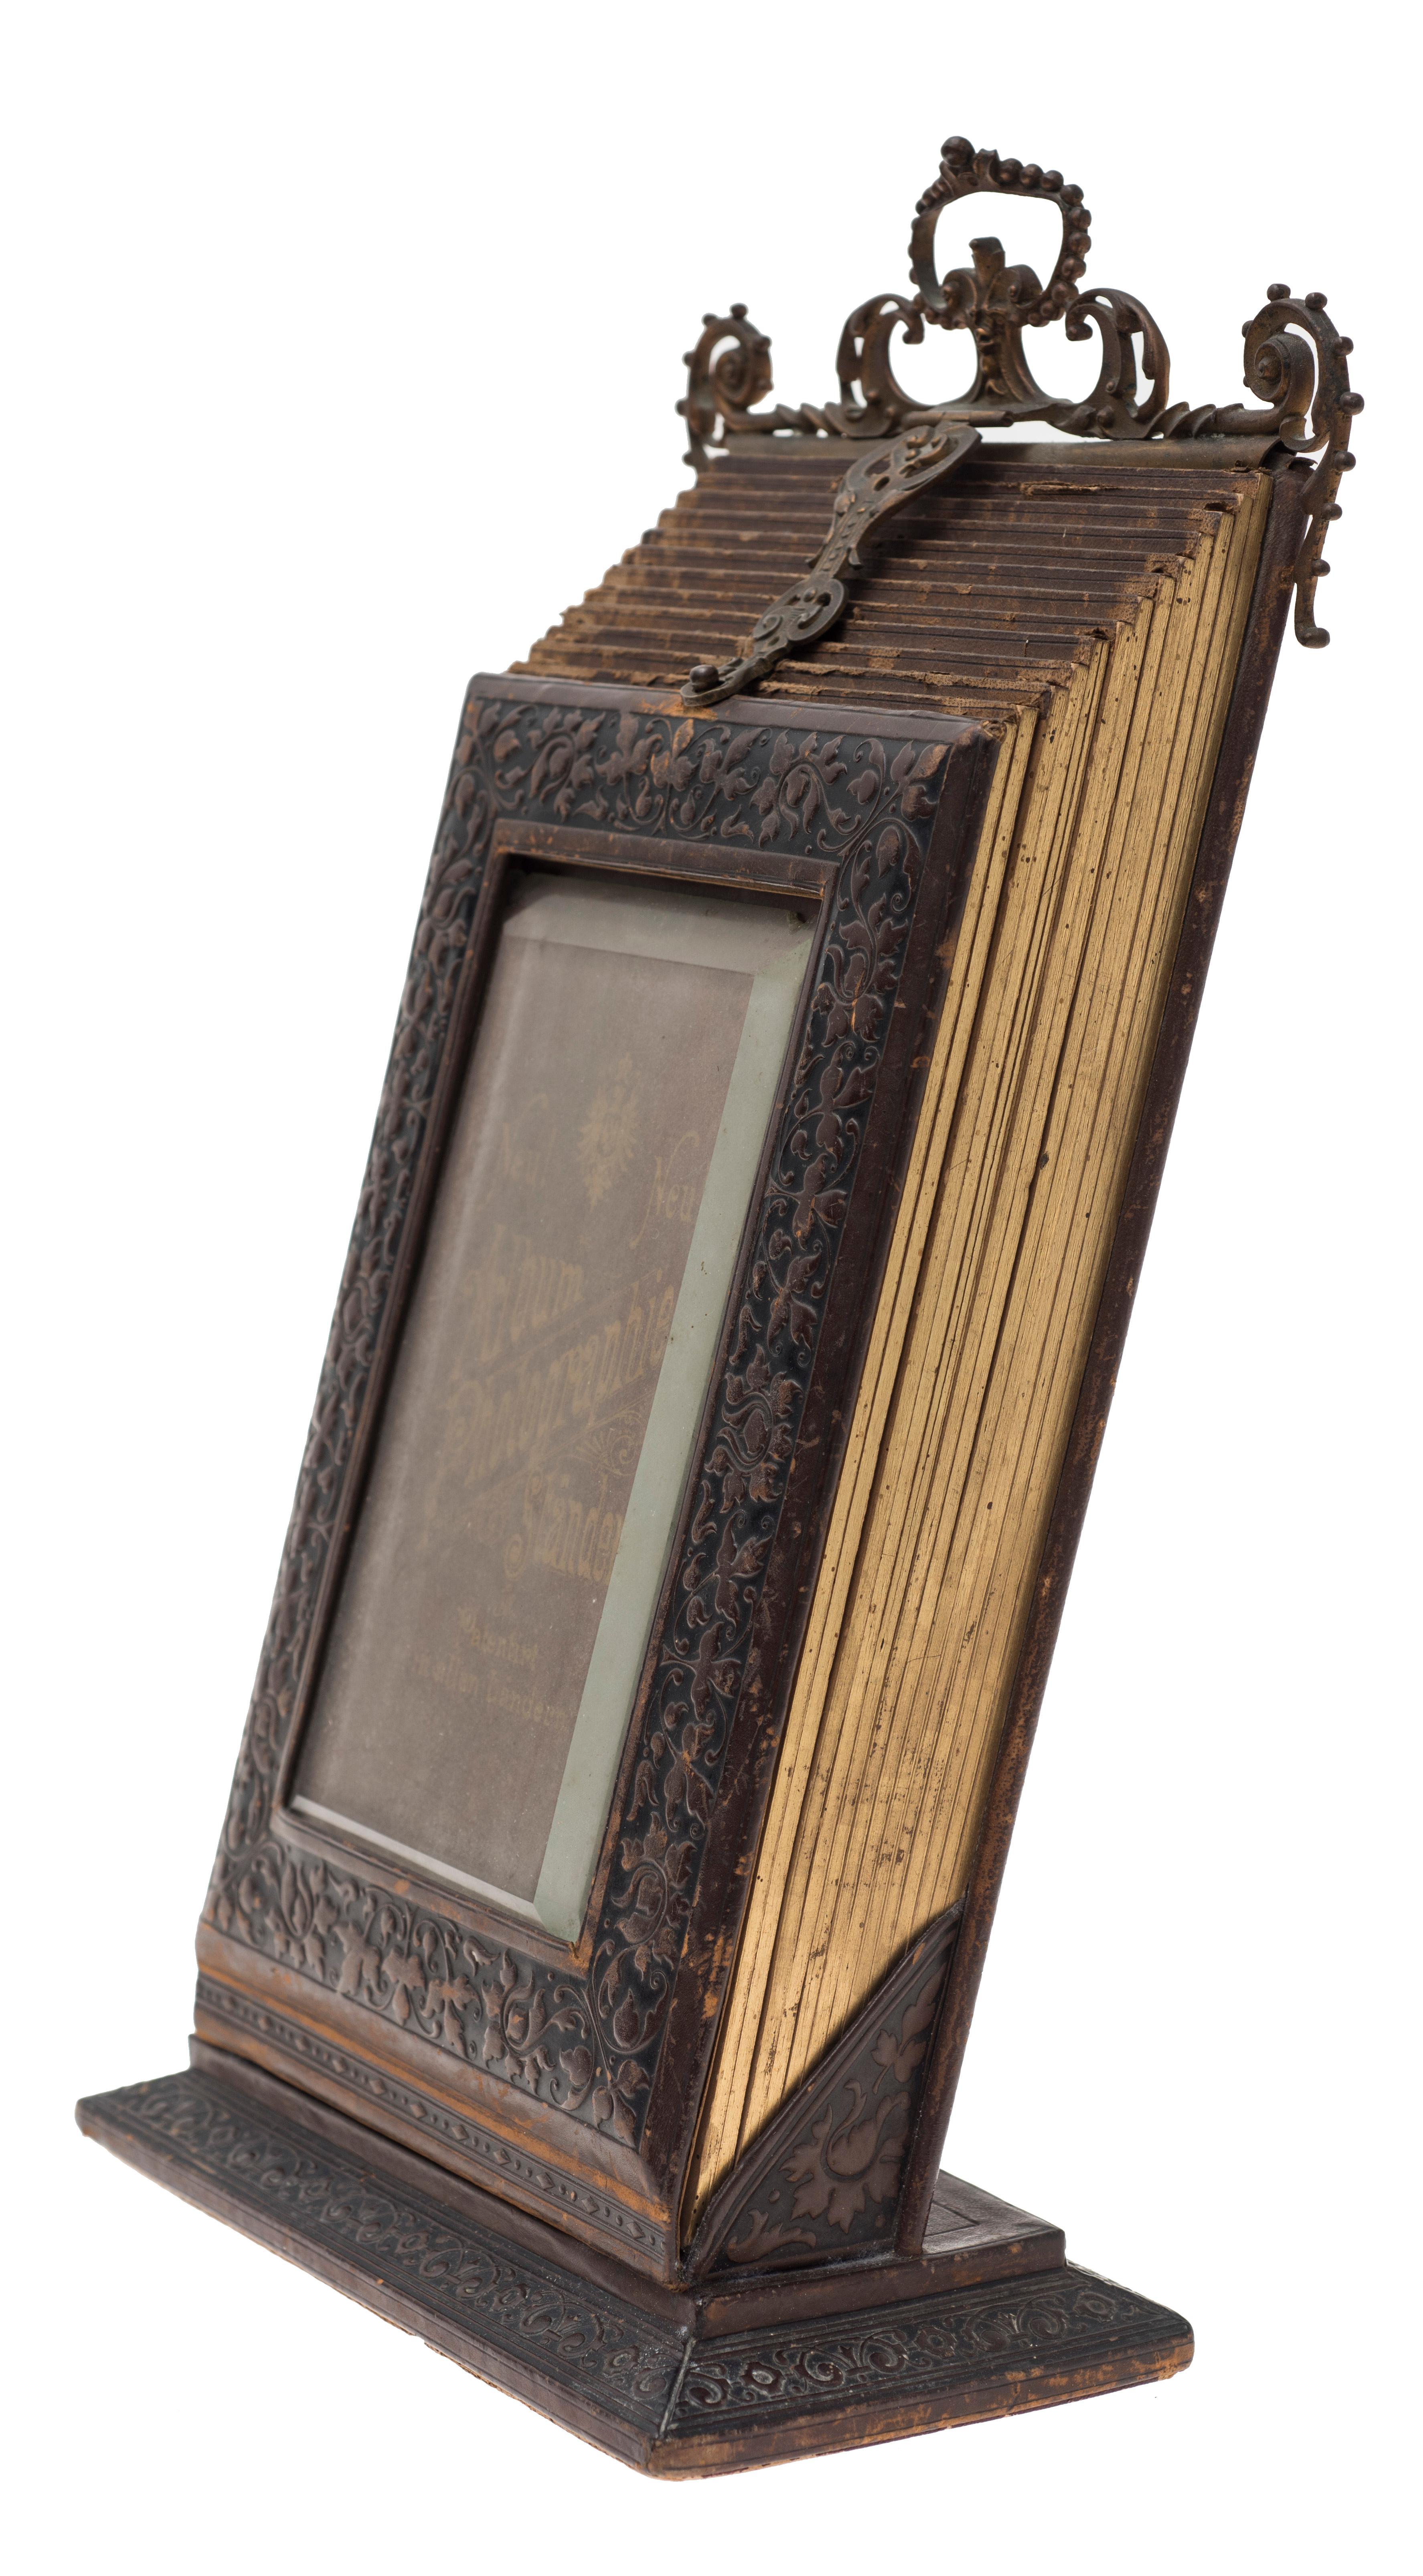 Ancient Bellowes photo frame by German Manufacture mid-19th century in wood, leather, bronze and crystal.
It includes ancient photo portraits of a noble Italian family of circa 1880.
Very rare and in good conditions.

This object is shipped from